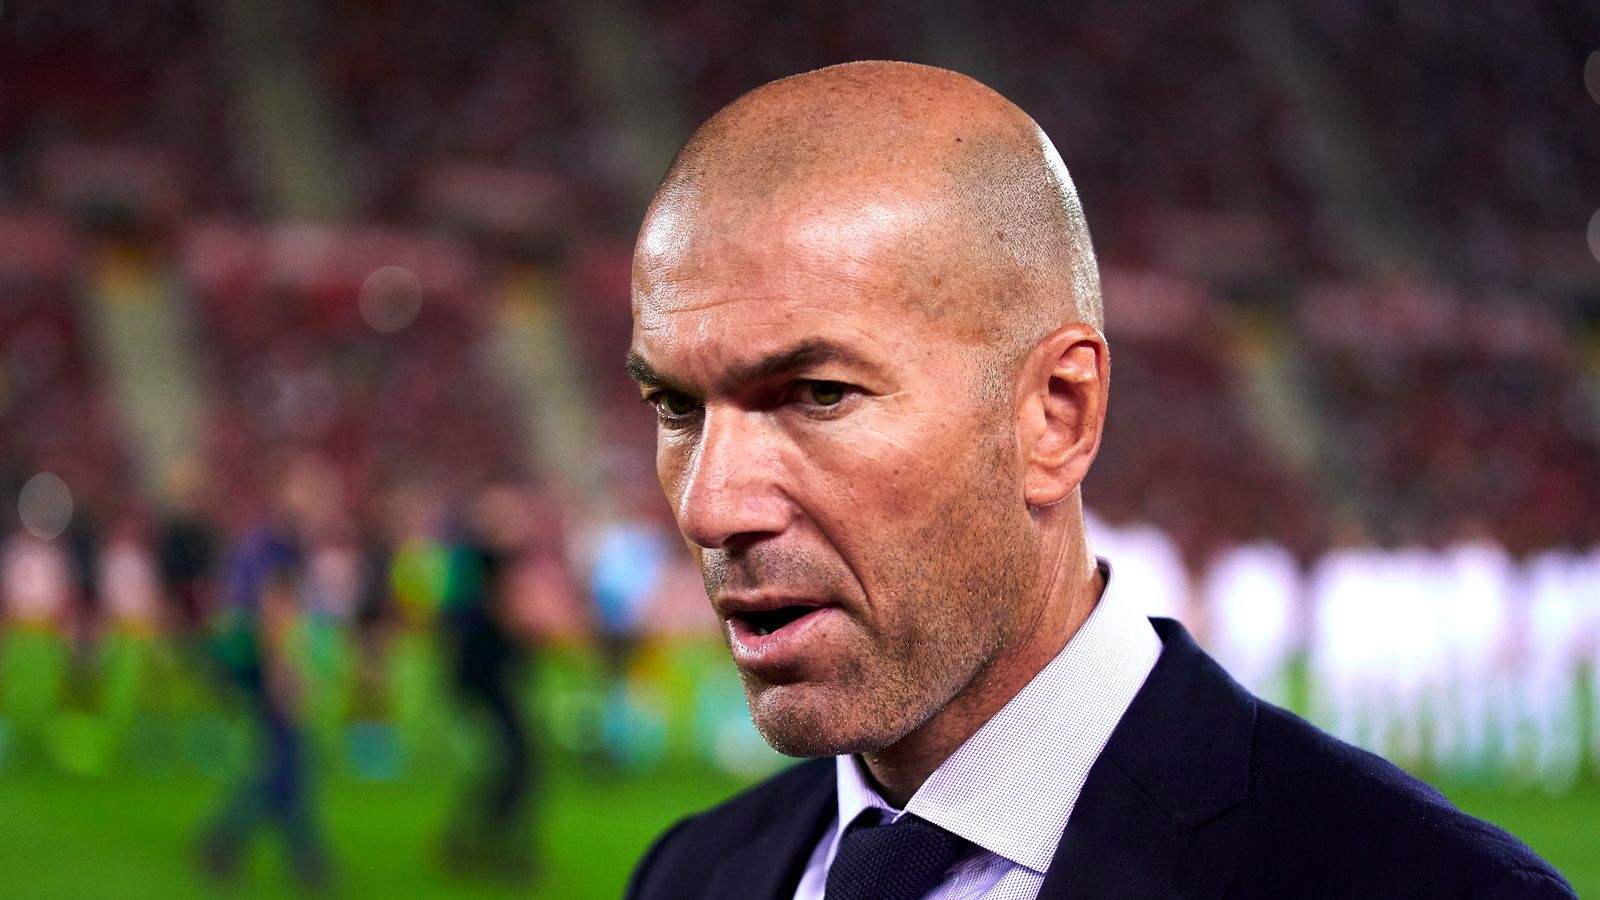 Real Madrid manager Zinedine Zidane gave a rallying call to his team  